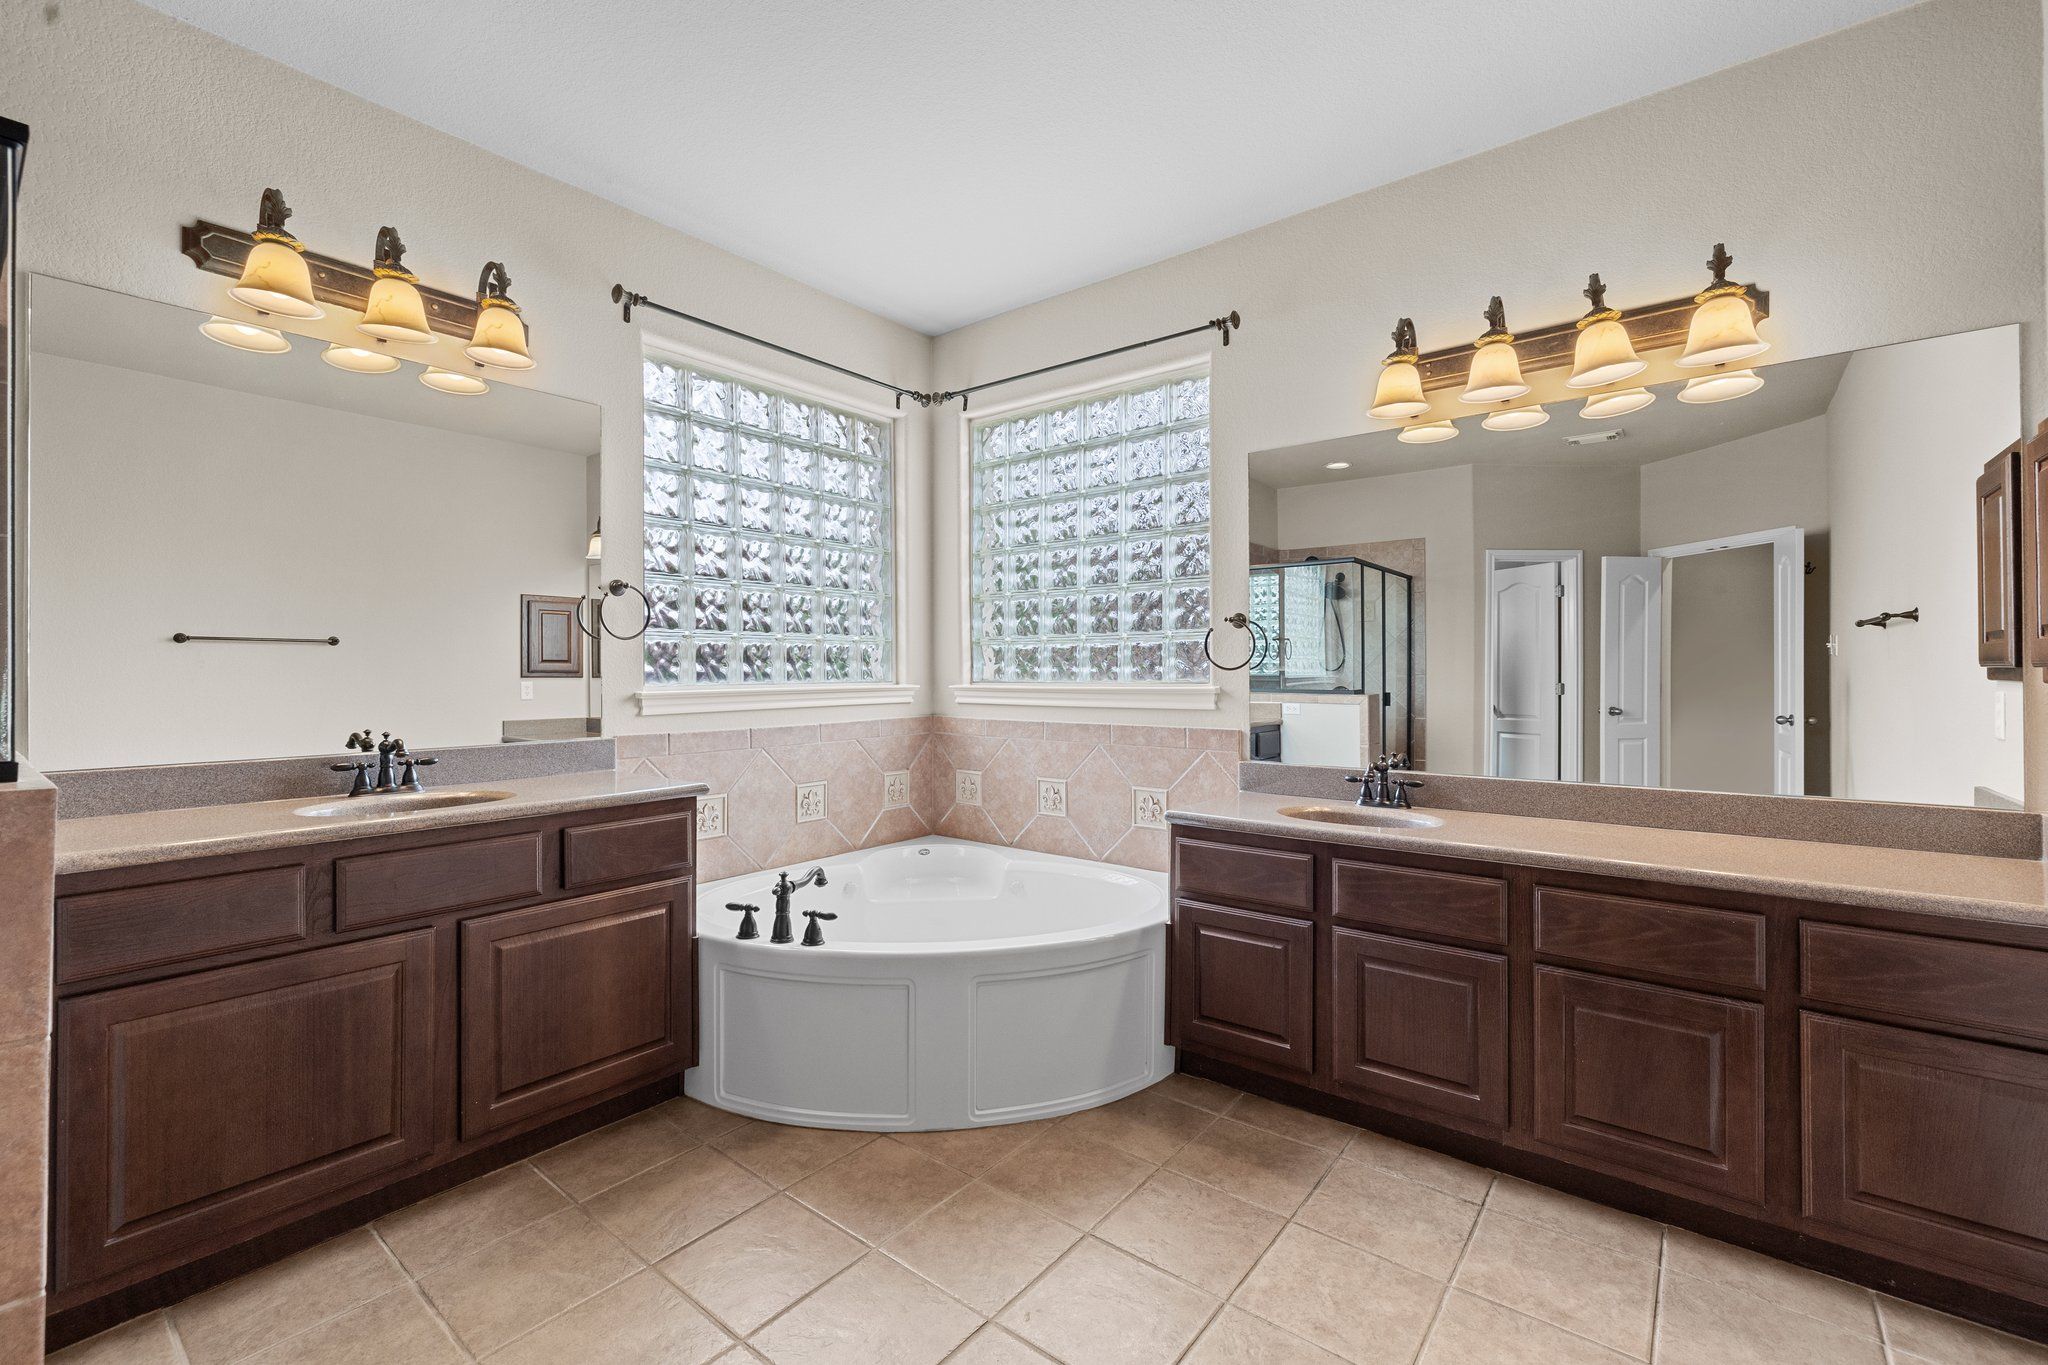 Lovely master bathroom with two sinks, large walk-in shower, jetted tub